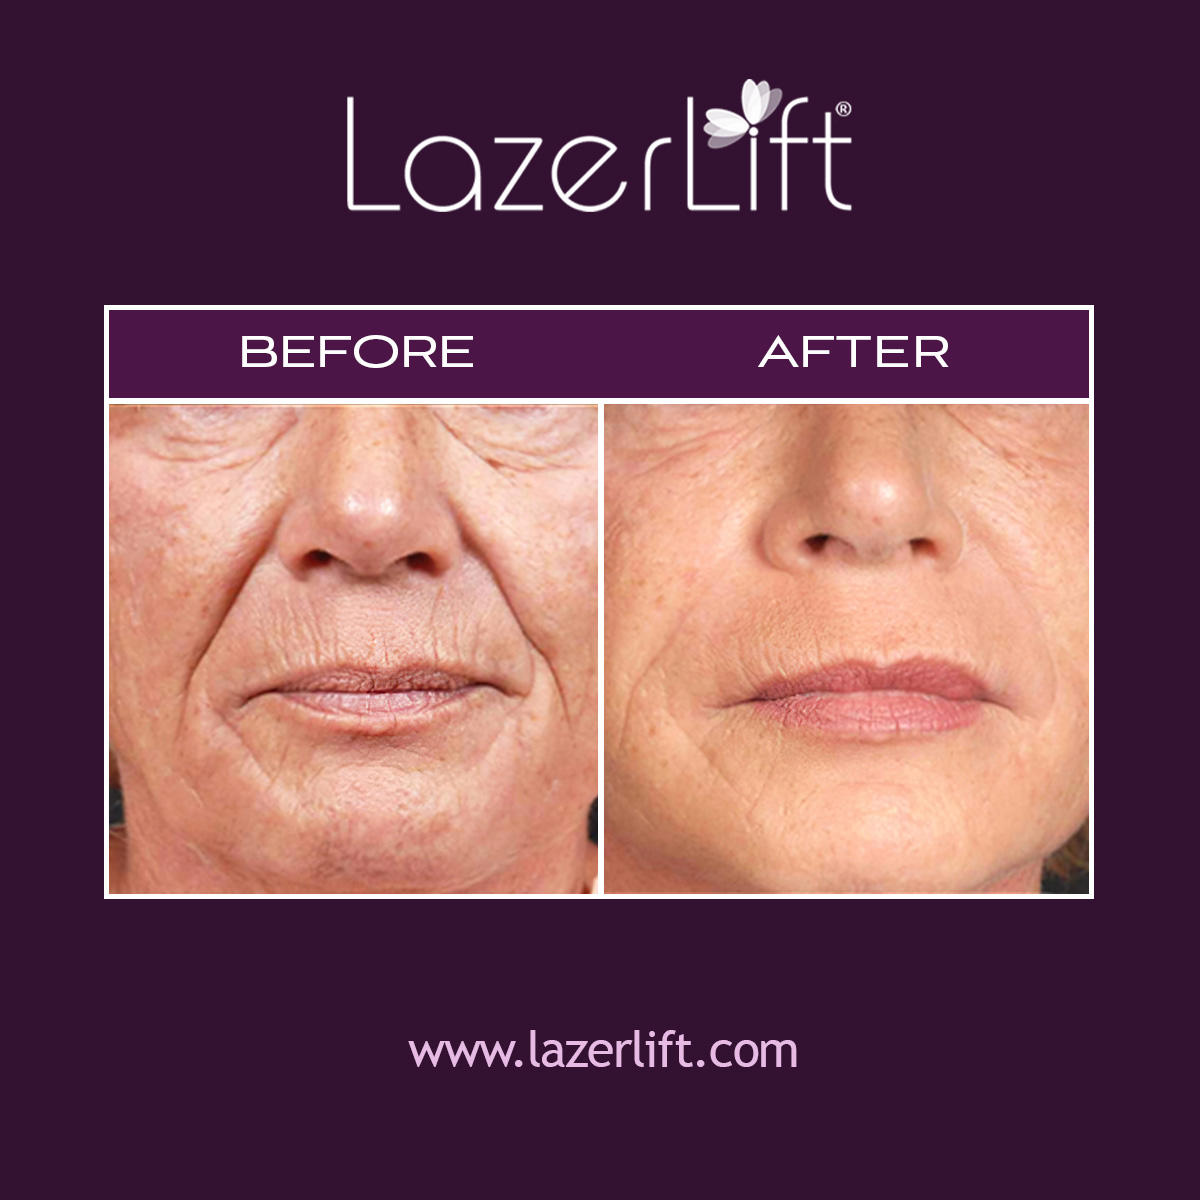 LazerLift® is the revolutionary minimally-invasive solution to combat the physical signs of facial aging. Now, patients can achieve a long-lasting lifted look without having to undergo a surgical procedure. LazerLift® uses innovative laser technology to heat the lower layers of the skin, promoting collagen production. LazerLift® is effective in tightening the lower face and neck, smoothing wrinkles, reducing sagging and jowls, and more.